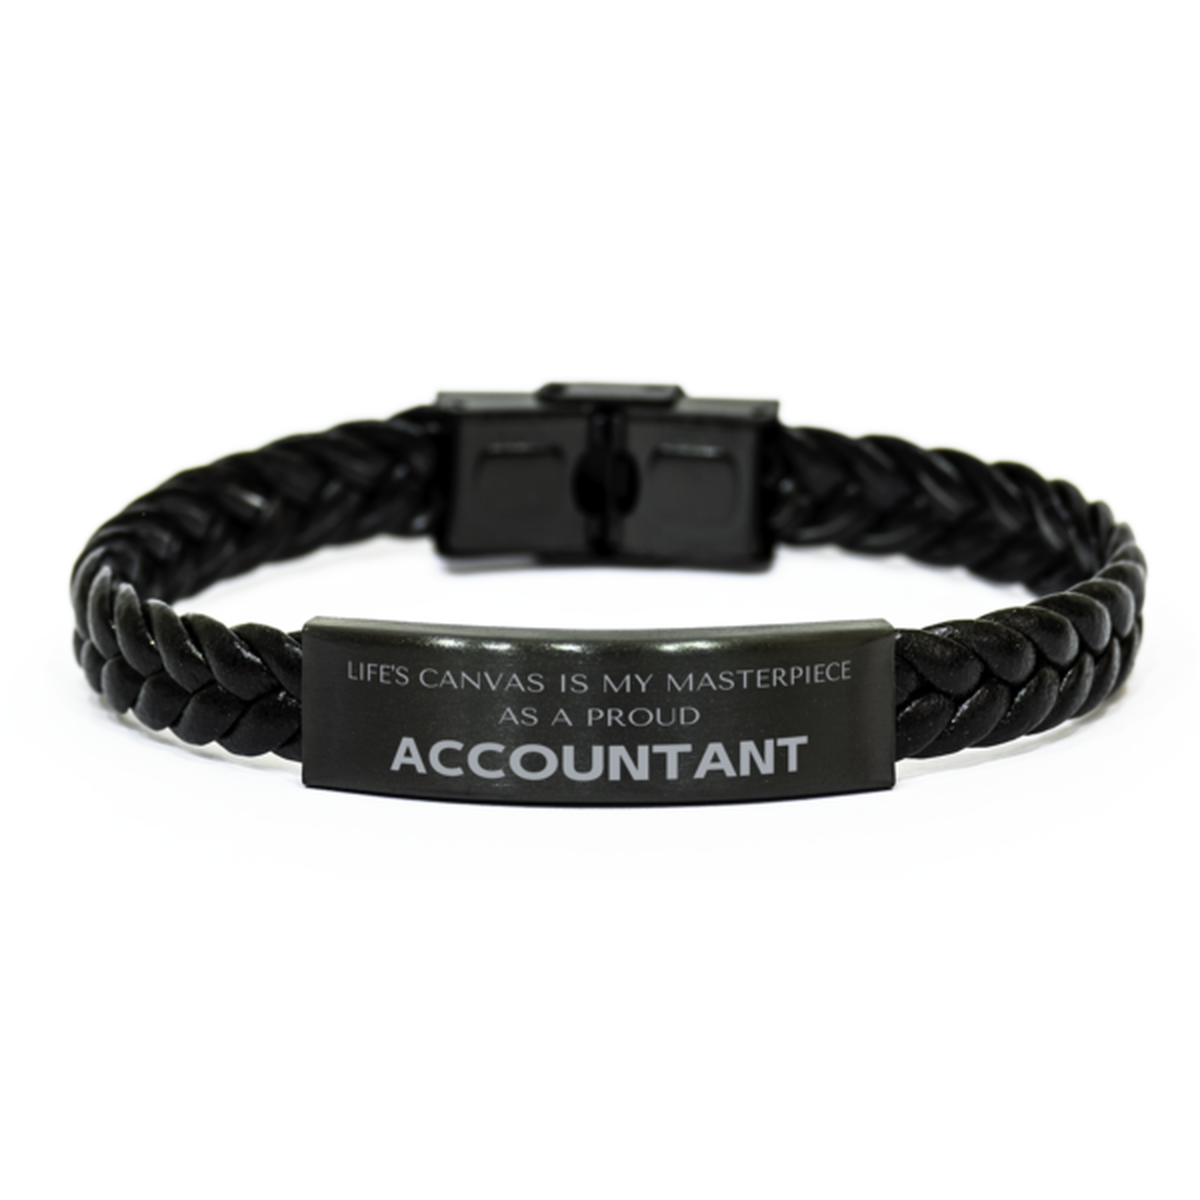 Proud Accountant Gifts, Life's canvas is my masterpiece, Epic Birthday Christmas Unique Braided Leather Bracelet For Accountant, Coworkers, Men, Women, Friends